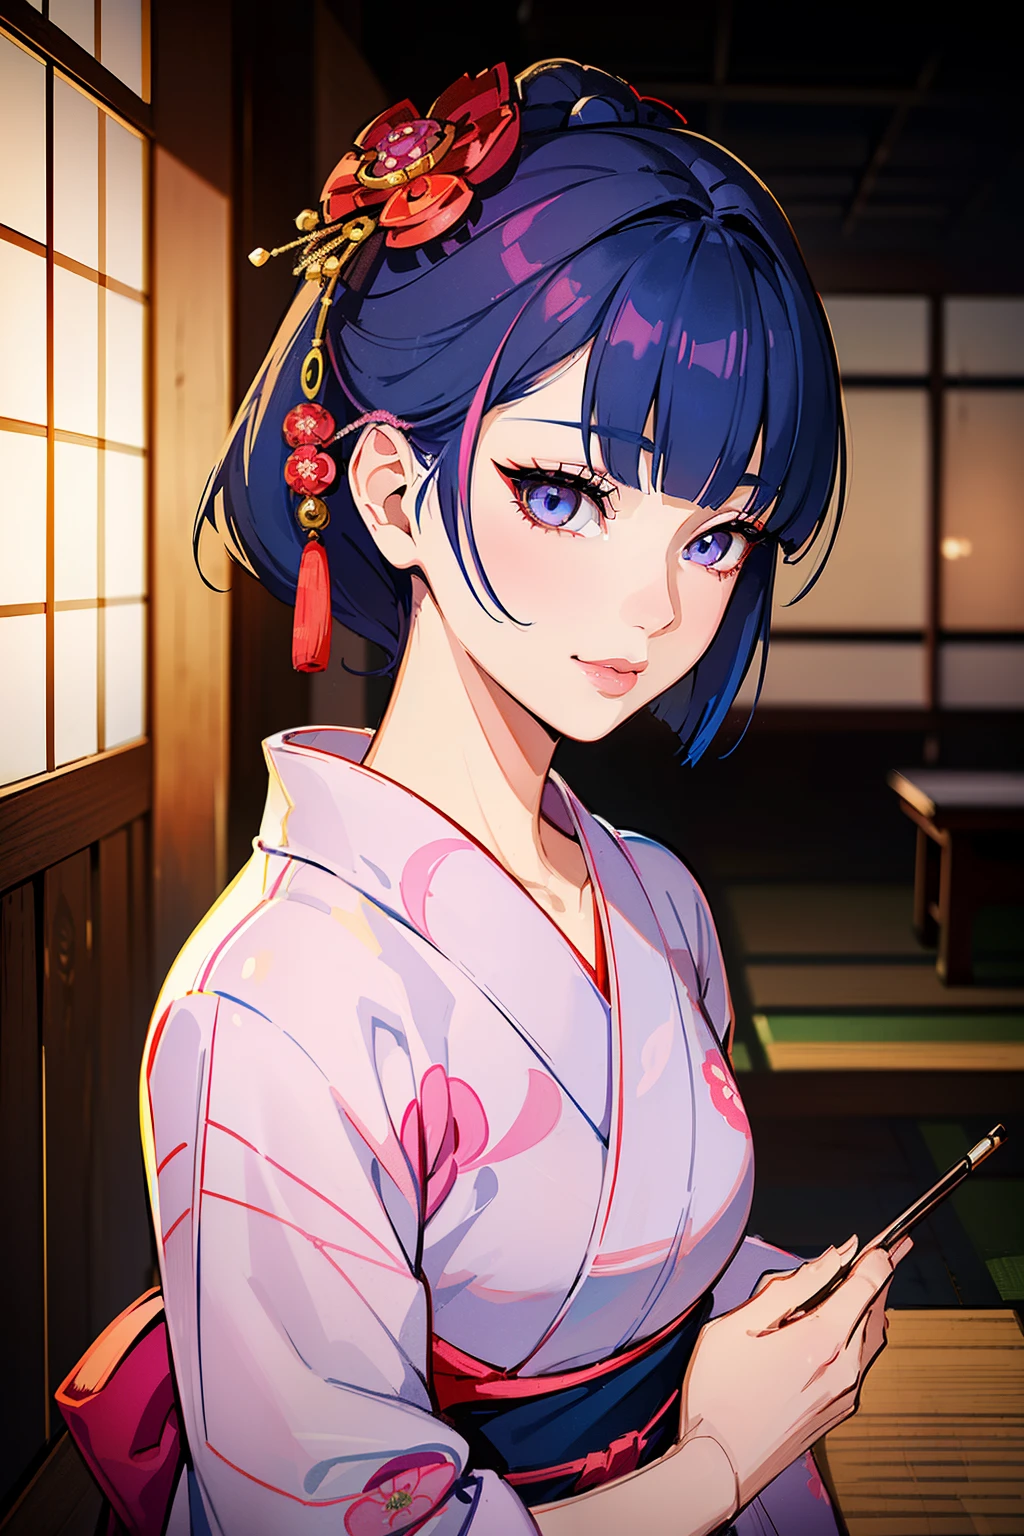 (high-quality, breathtaking),(expressive eyes, perfect face) (((yukata, sexy lips)), 1girl, female, solo, young adult, pale dark blue hair, pink coloured eyes, stylised hair, gentle smile, short length hair, loose hair, side bangs, japanese clothing, elegant, soft make up, hair pin accessory in hair, oiran, demon slayer art style